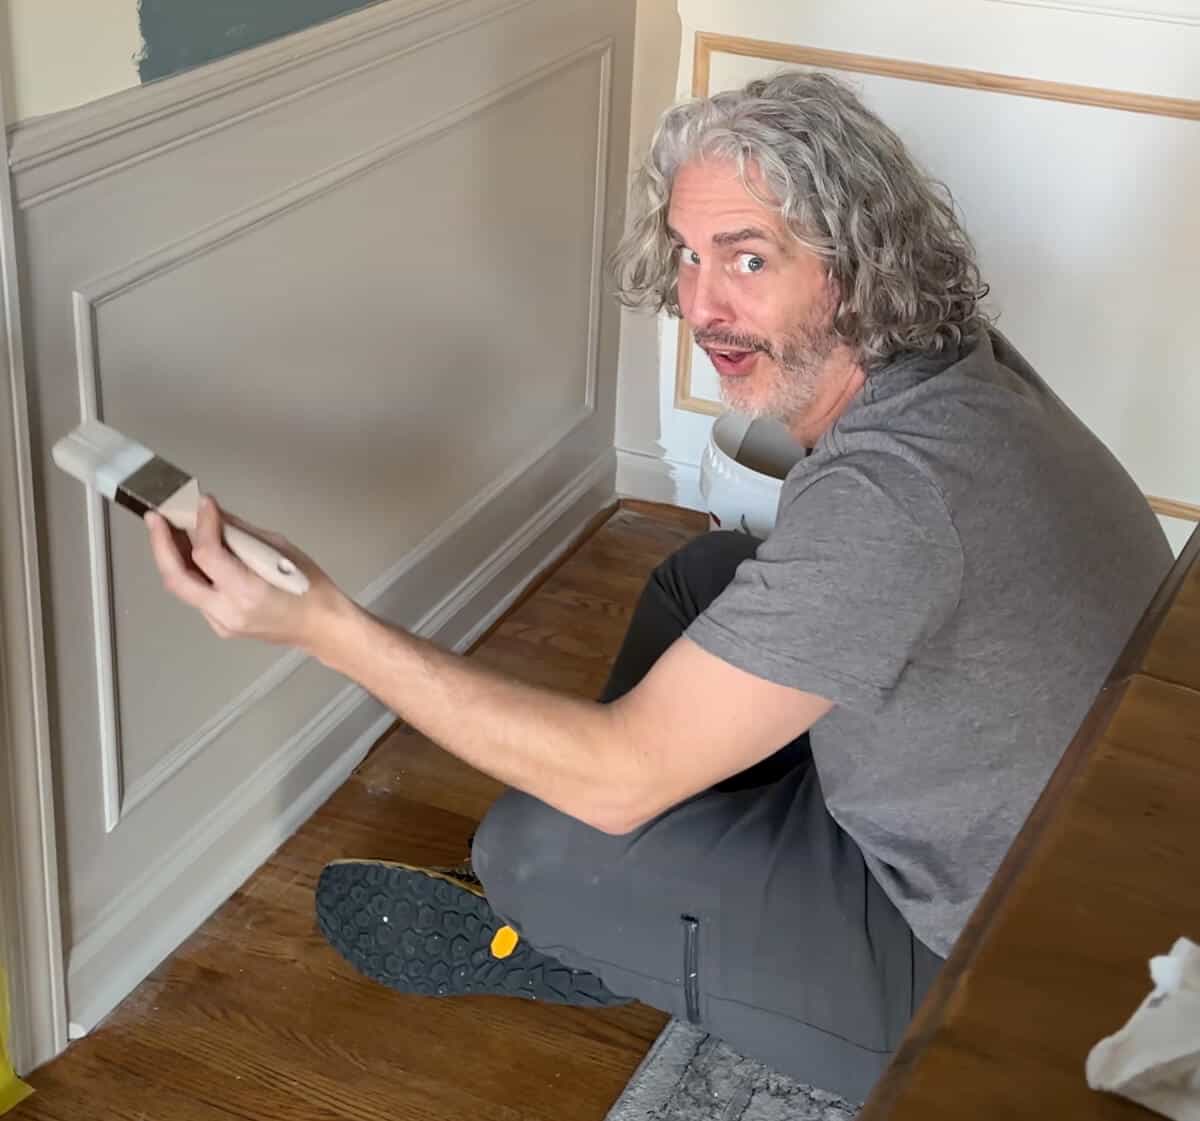 man making silly face while painting wainscoting